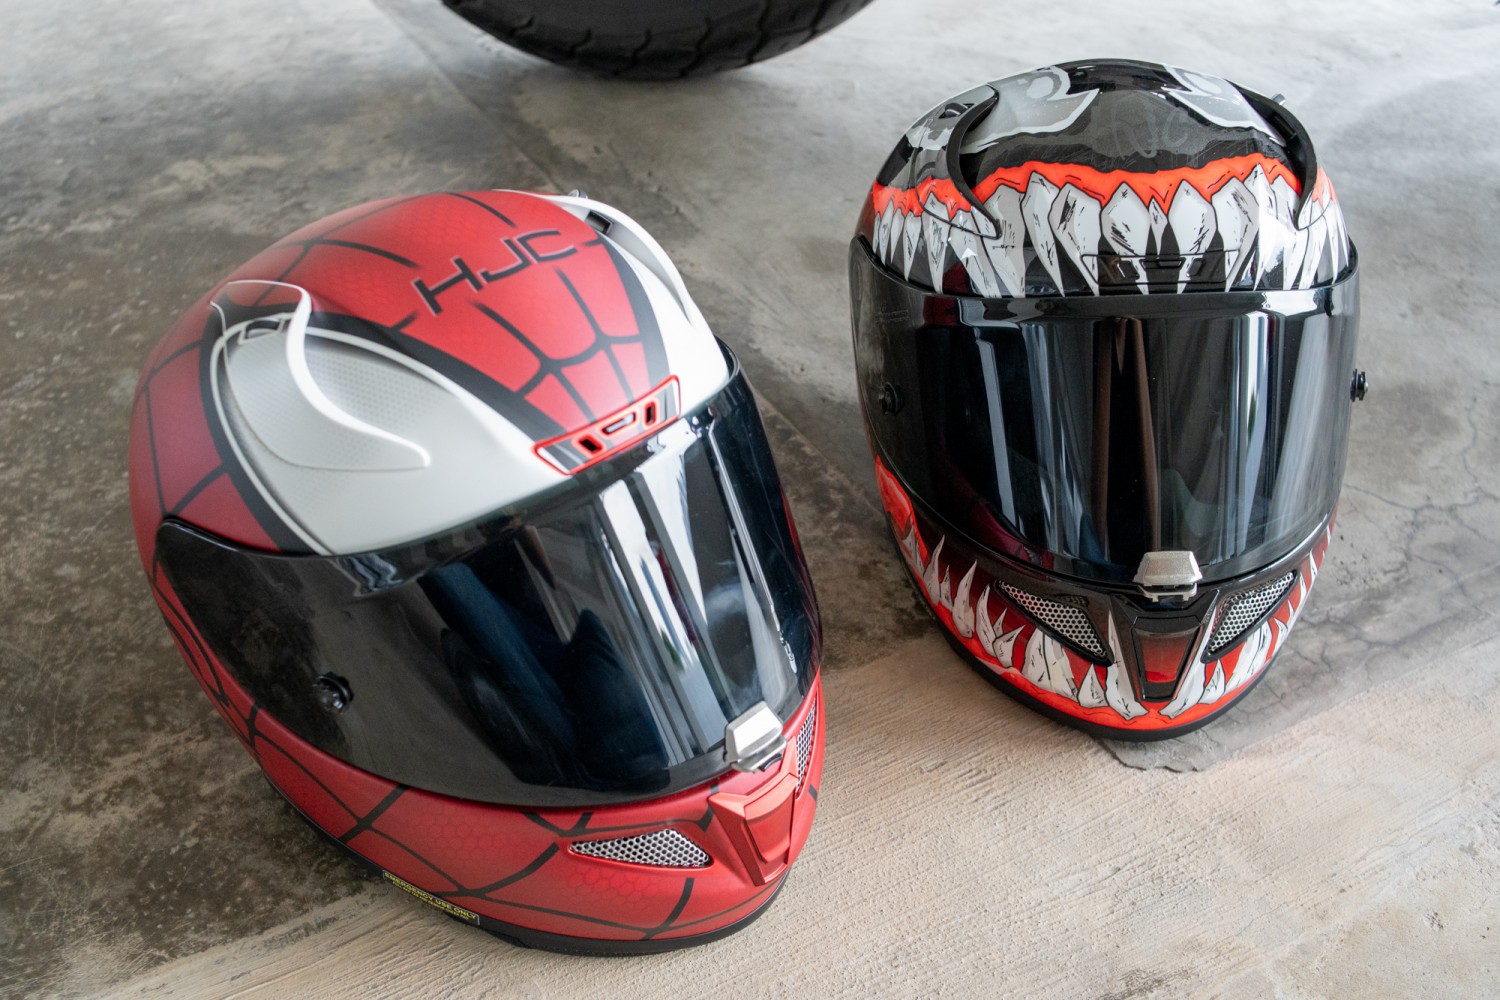 Ride Like A Badass With These Spider-Man Themed HJC Motorcycle Helmets |  Geek Culture